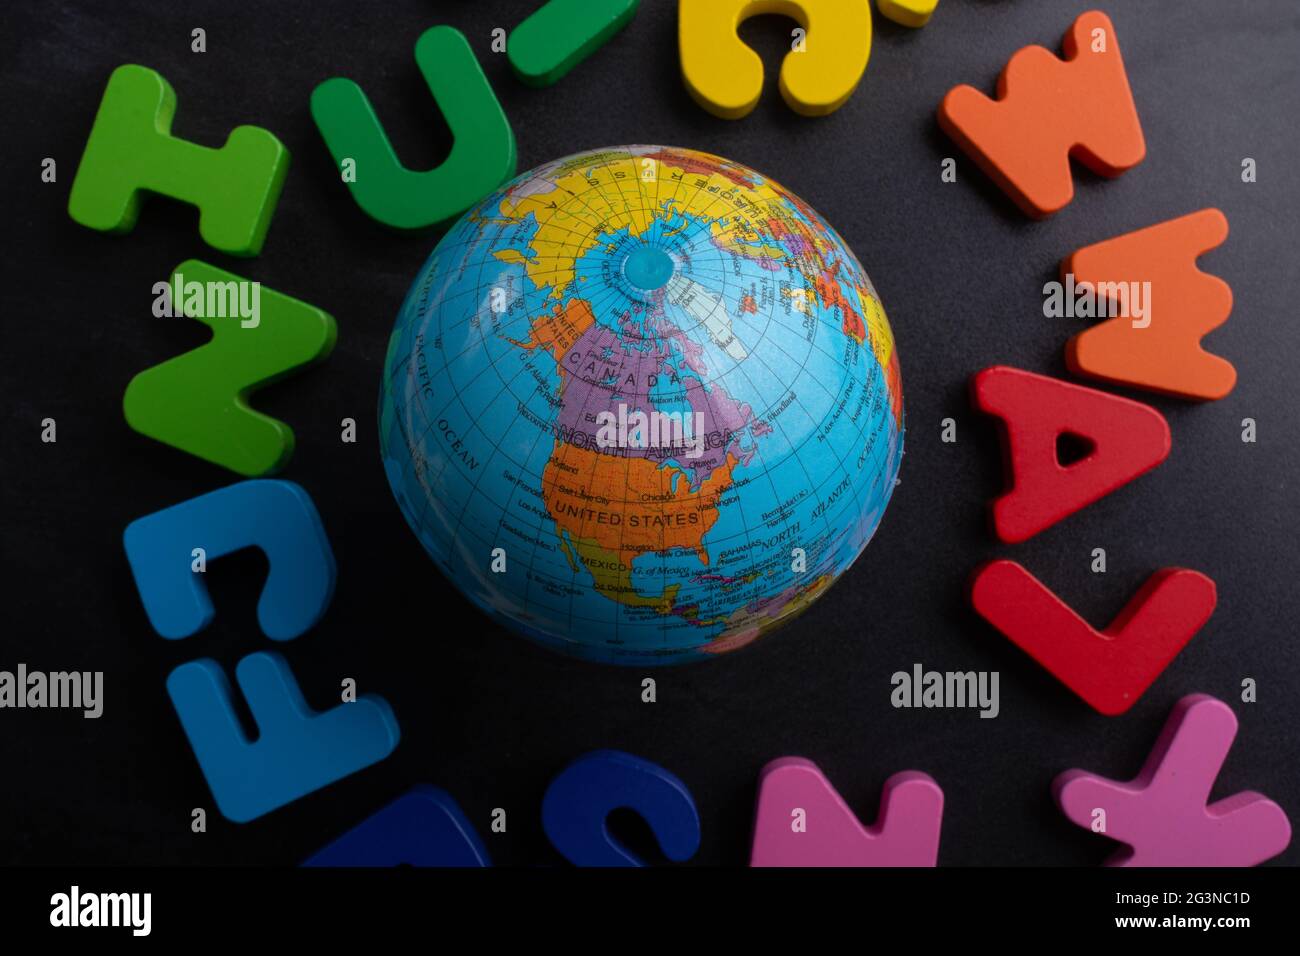 Globe model on colorful letters on a black background Stock Photo